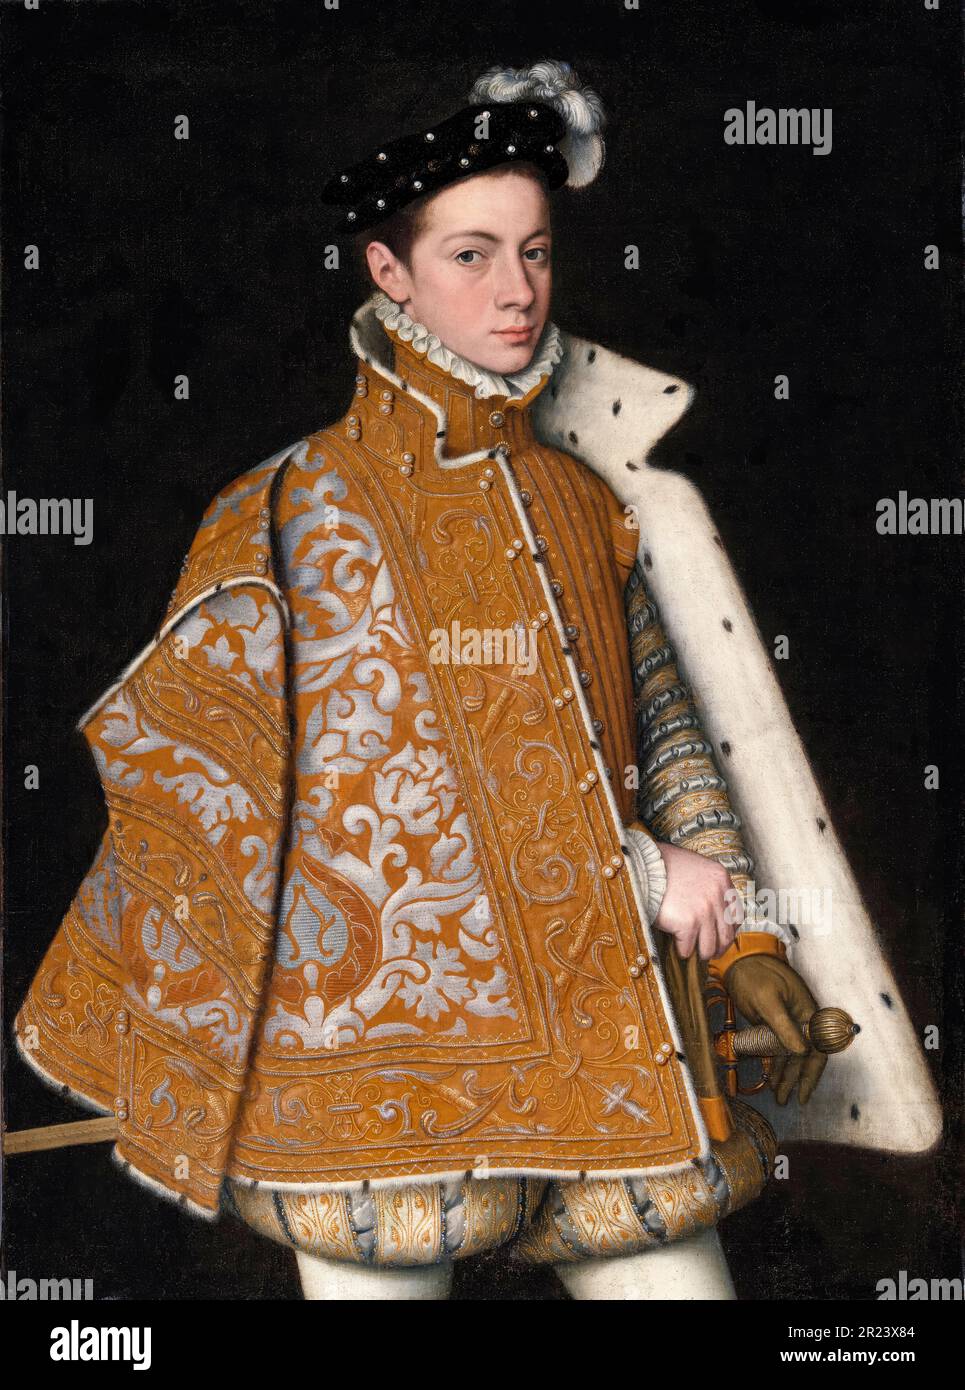 Prince Alessandro Farnese (1545-1592), later, Duke of Parma and Piacenza (1586-1592), as a teenage boy, portrait painting by Sofonisba Anguissola, circa 1560 Stock Photo